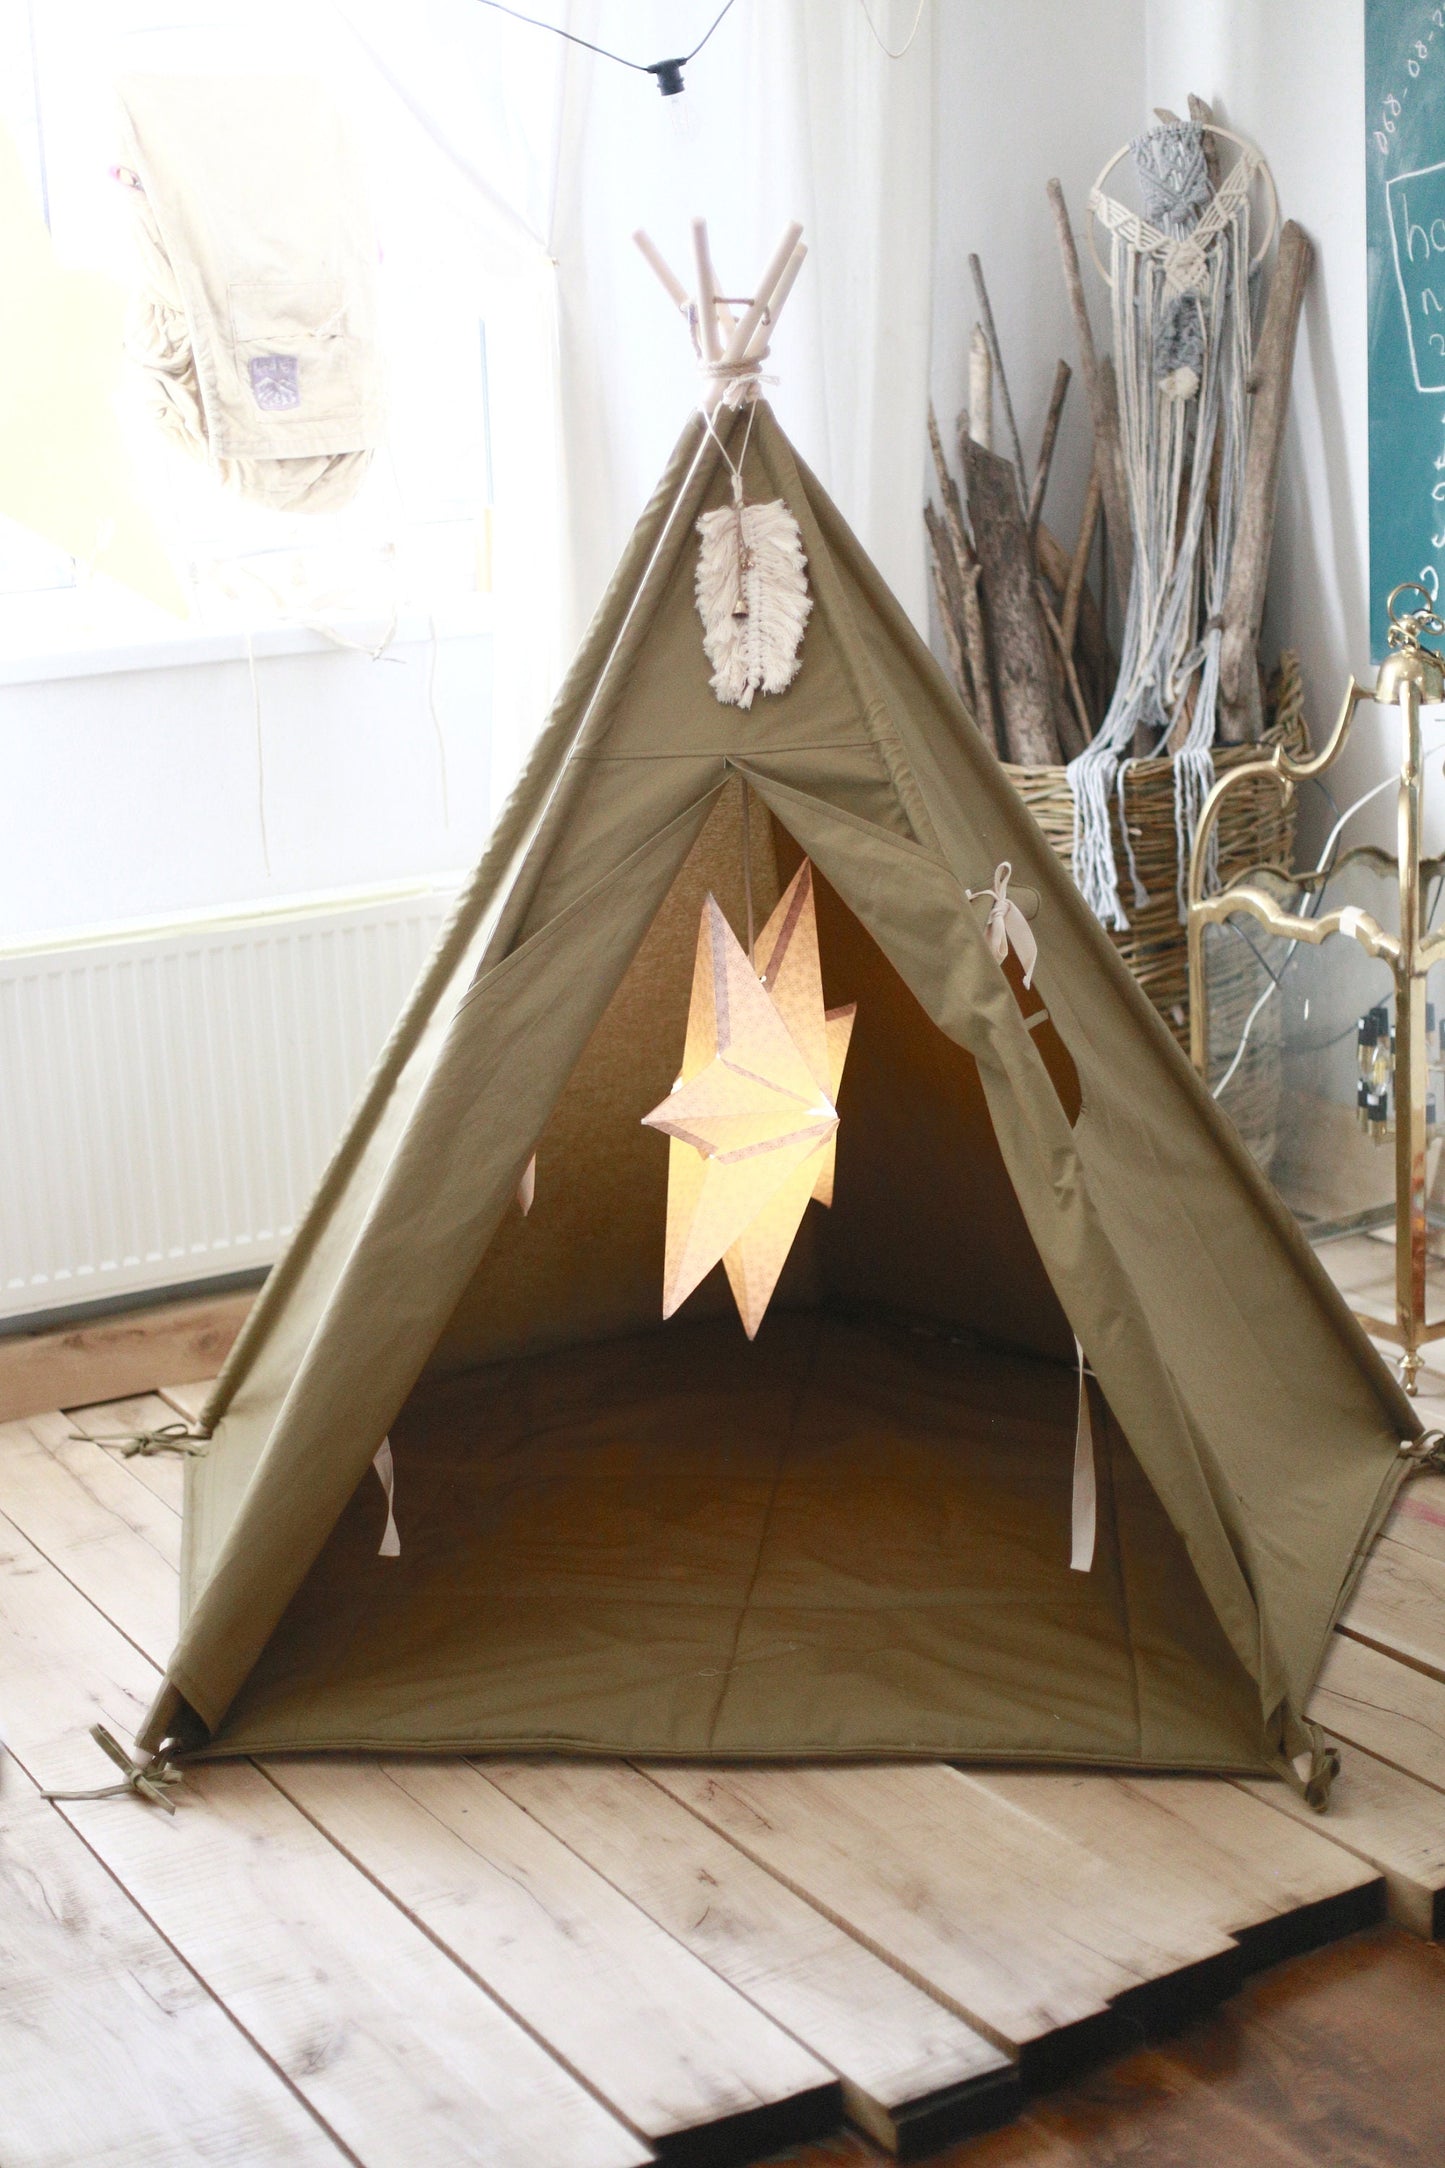 Kids Teepee Tent, Baby Tent House, Mini Tent, Playroom Tent, Tipi Glamping, American Kids Teepee Tent - Christmas gift